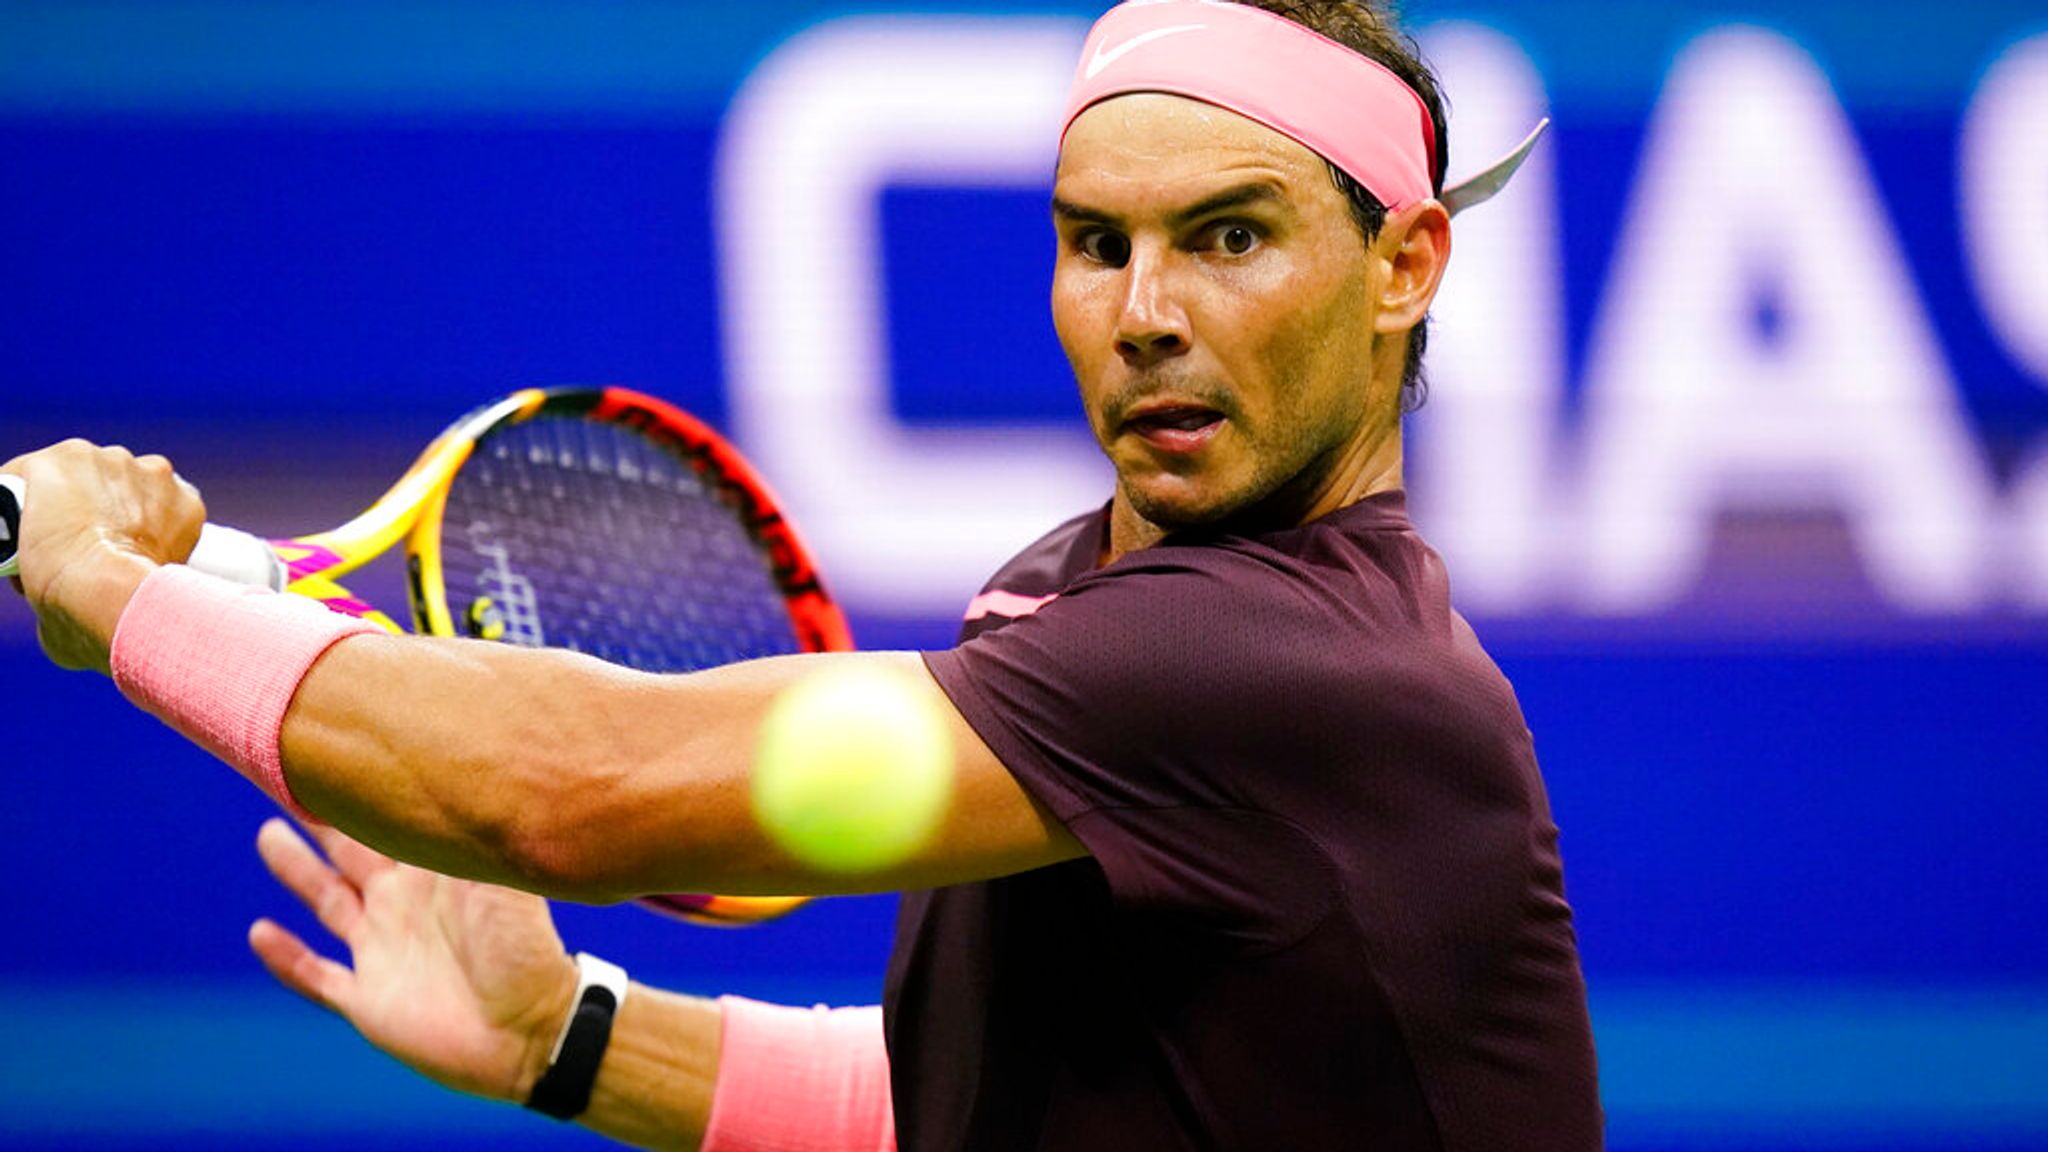 US Open Rafael Nadal recovers to secure first-round victory Tennis News Sky Sports